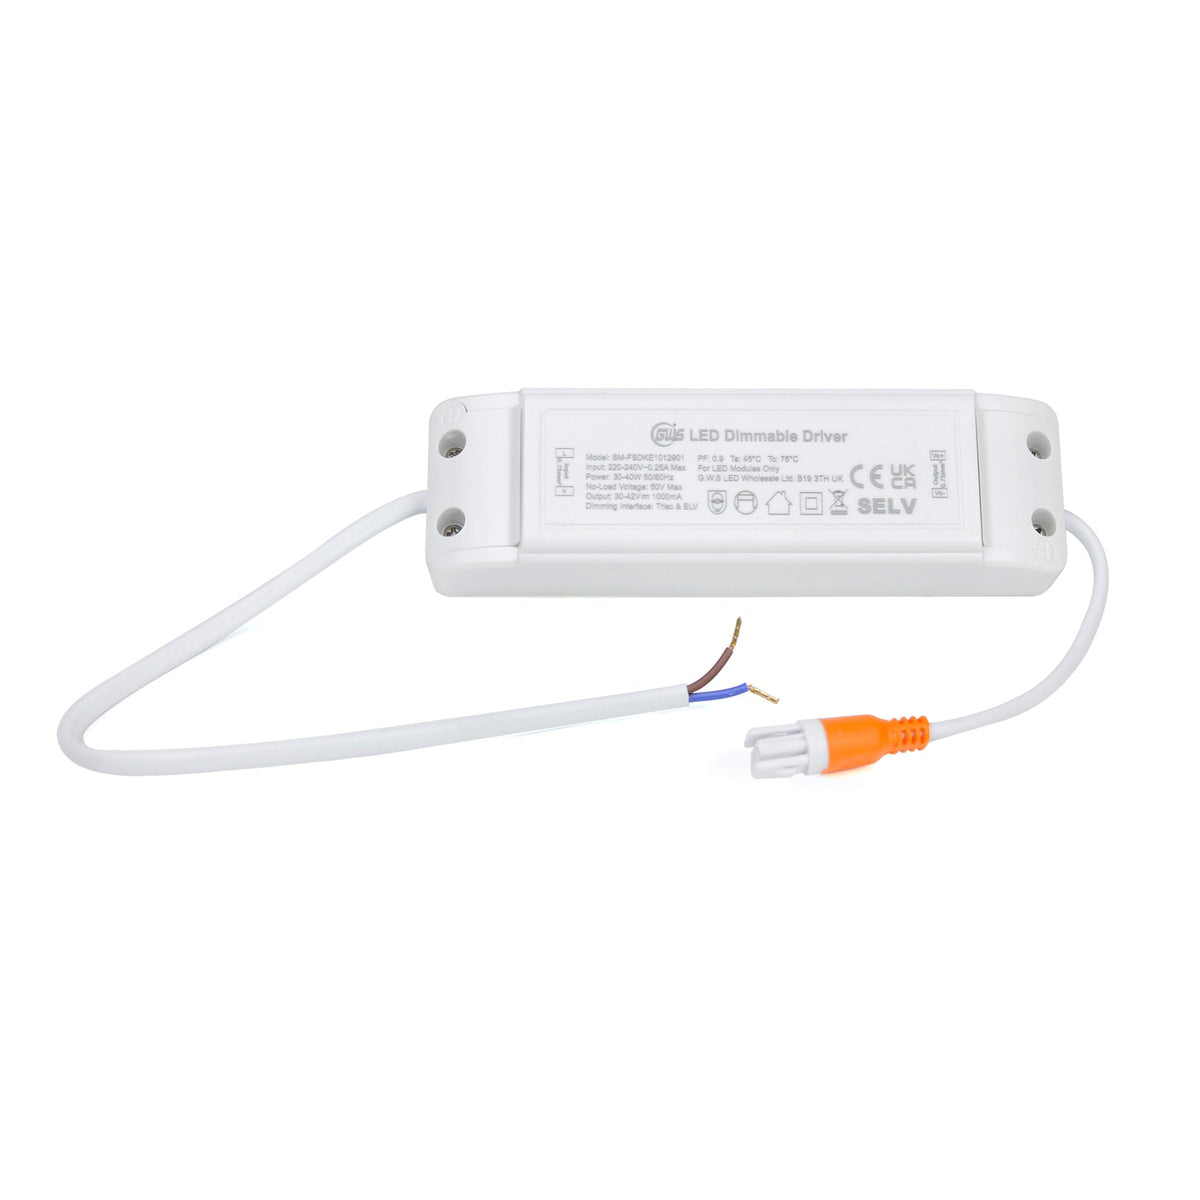 G.W.S LED Wholesale LED Drivers/LED Power Supplies Triac Constant Current LED Dimmable Driver 30-40W